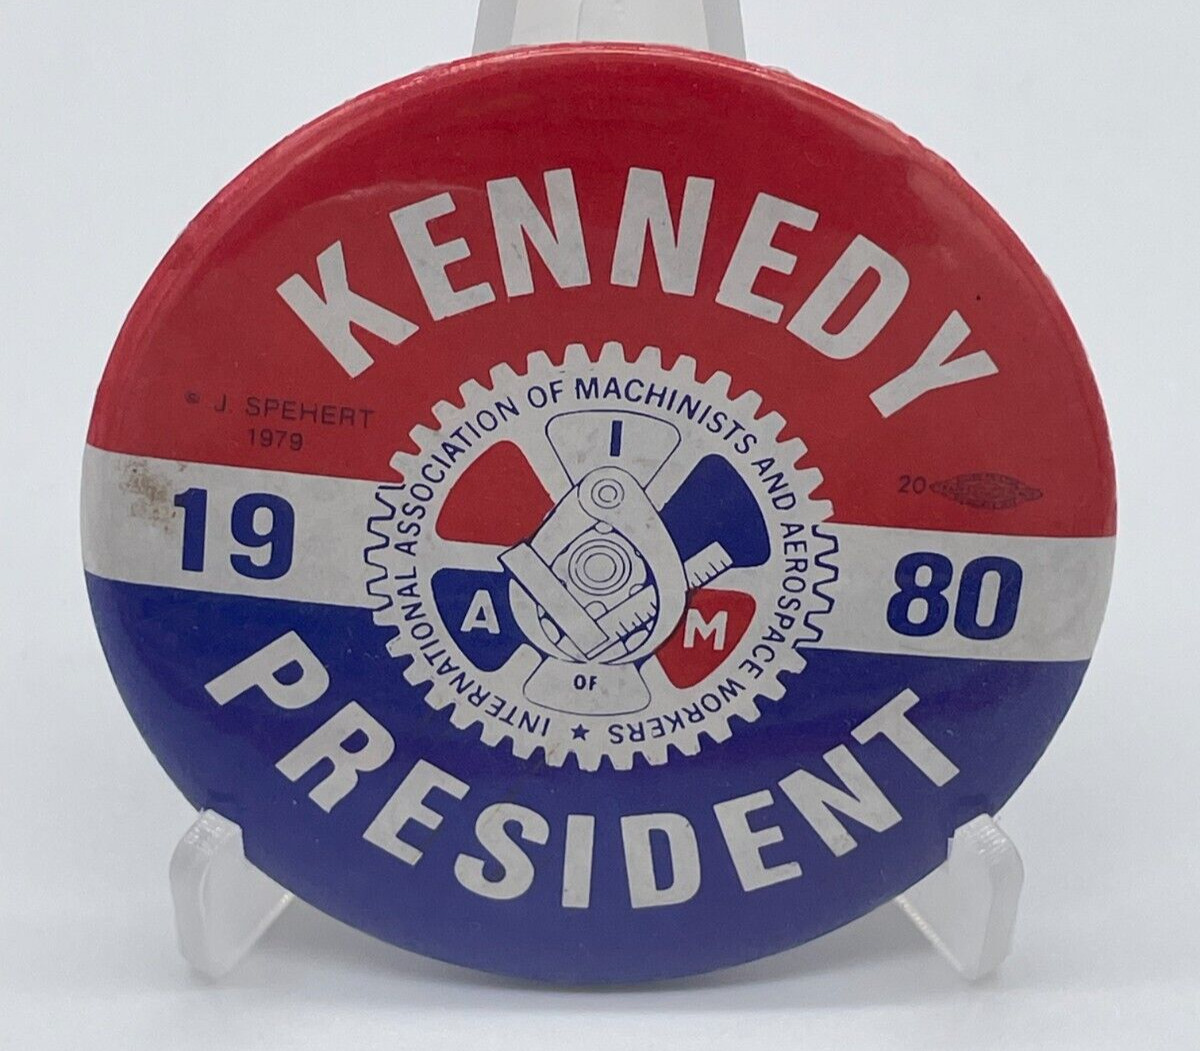 Ted Kennedy For President 1980 International Association Of Machinist Aerospace